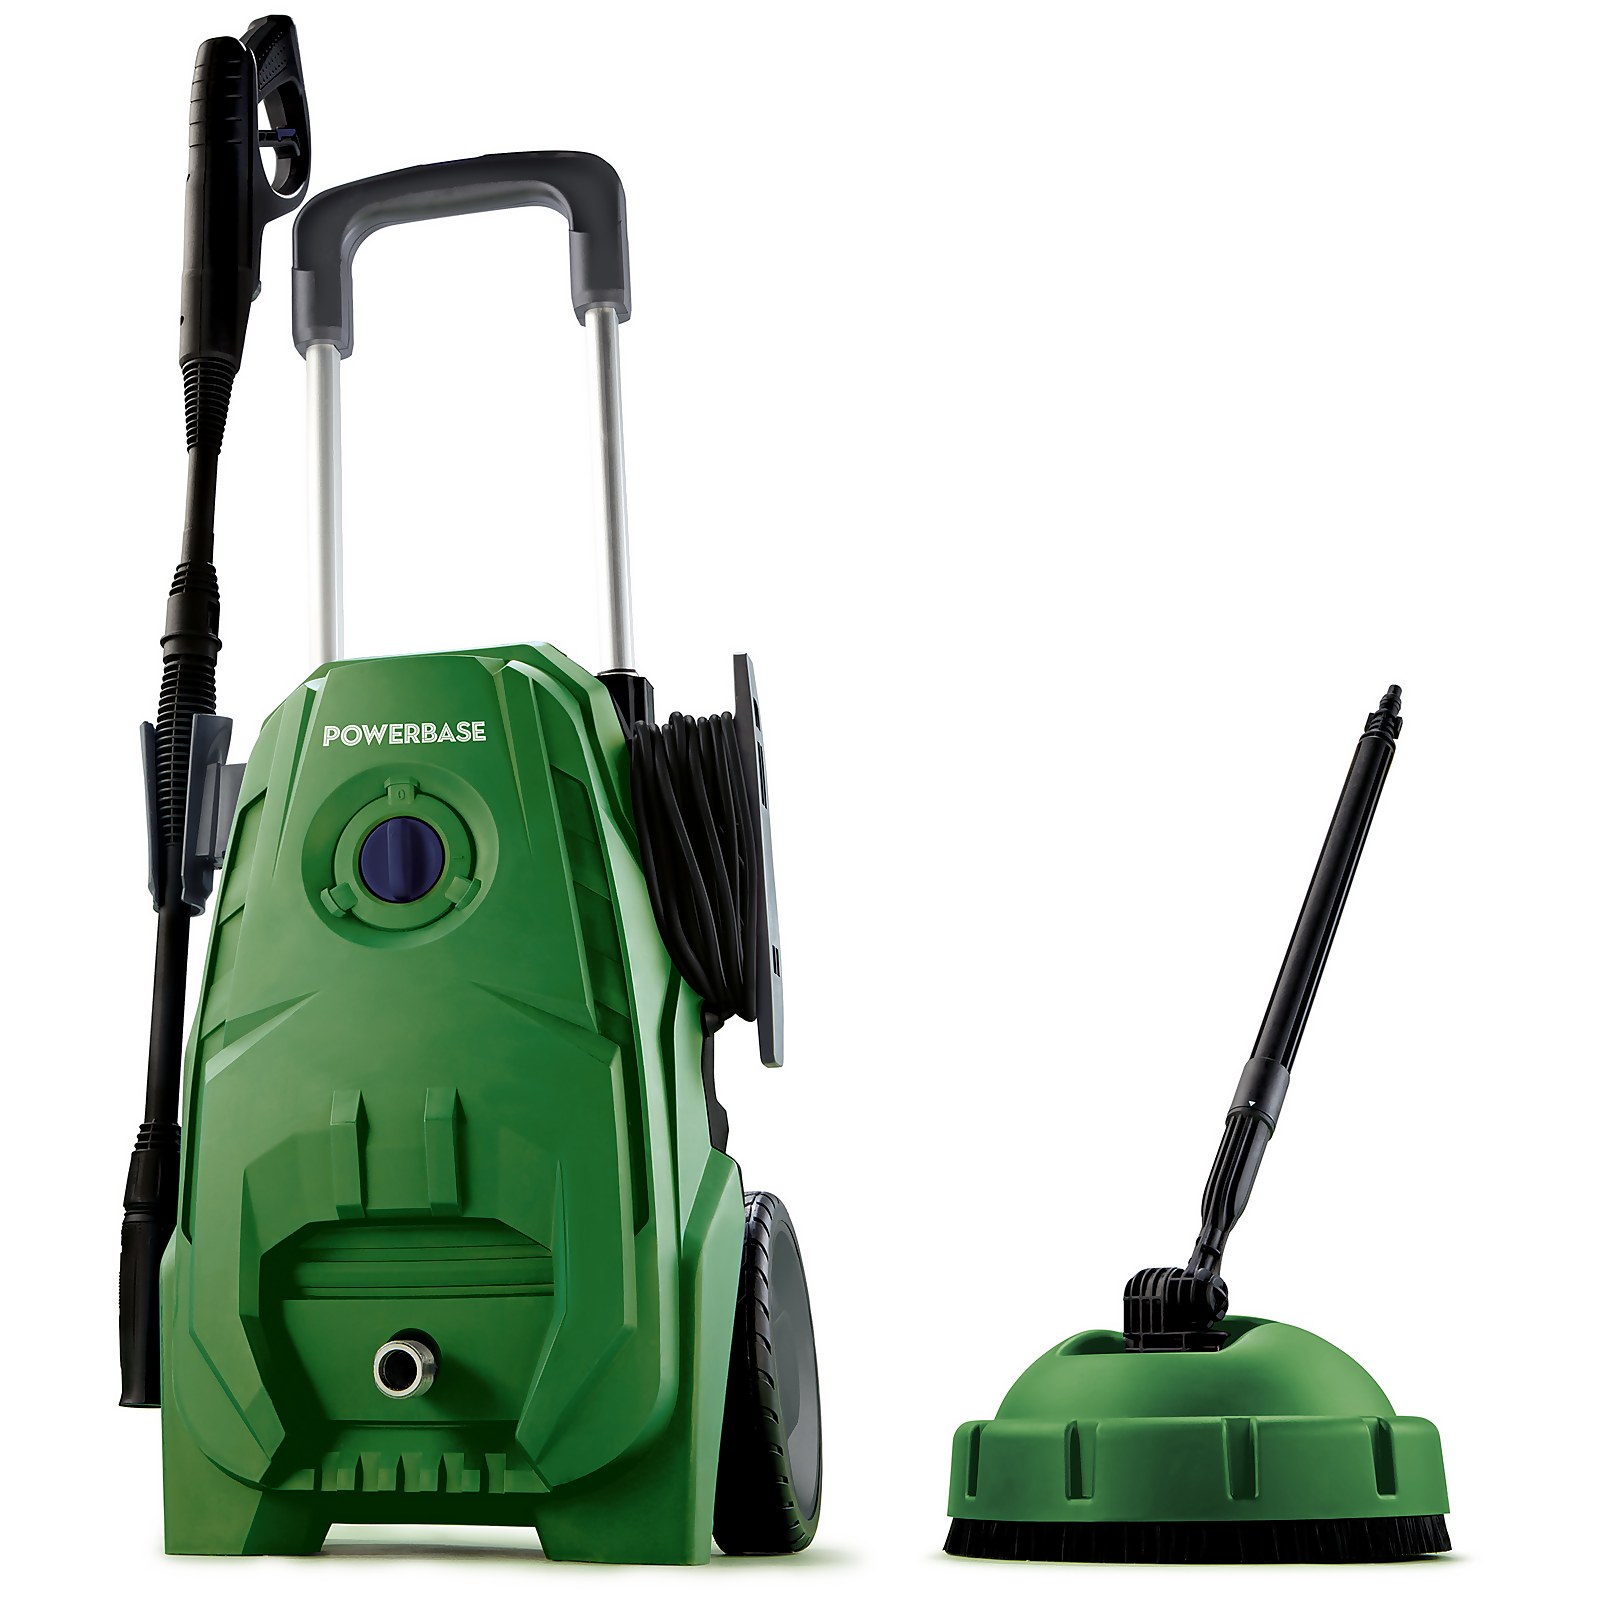 Powerbase 1850W Pressure Washer with Patio Cleaner